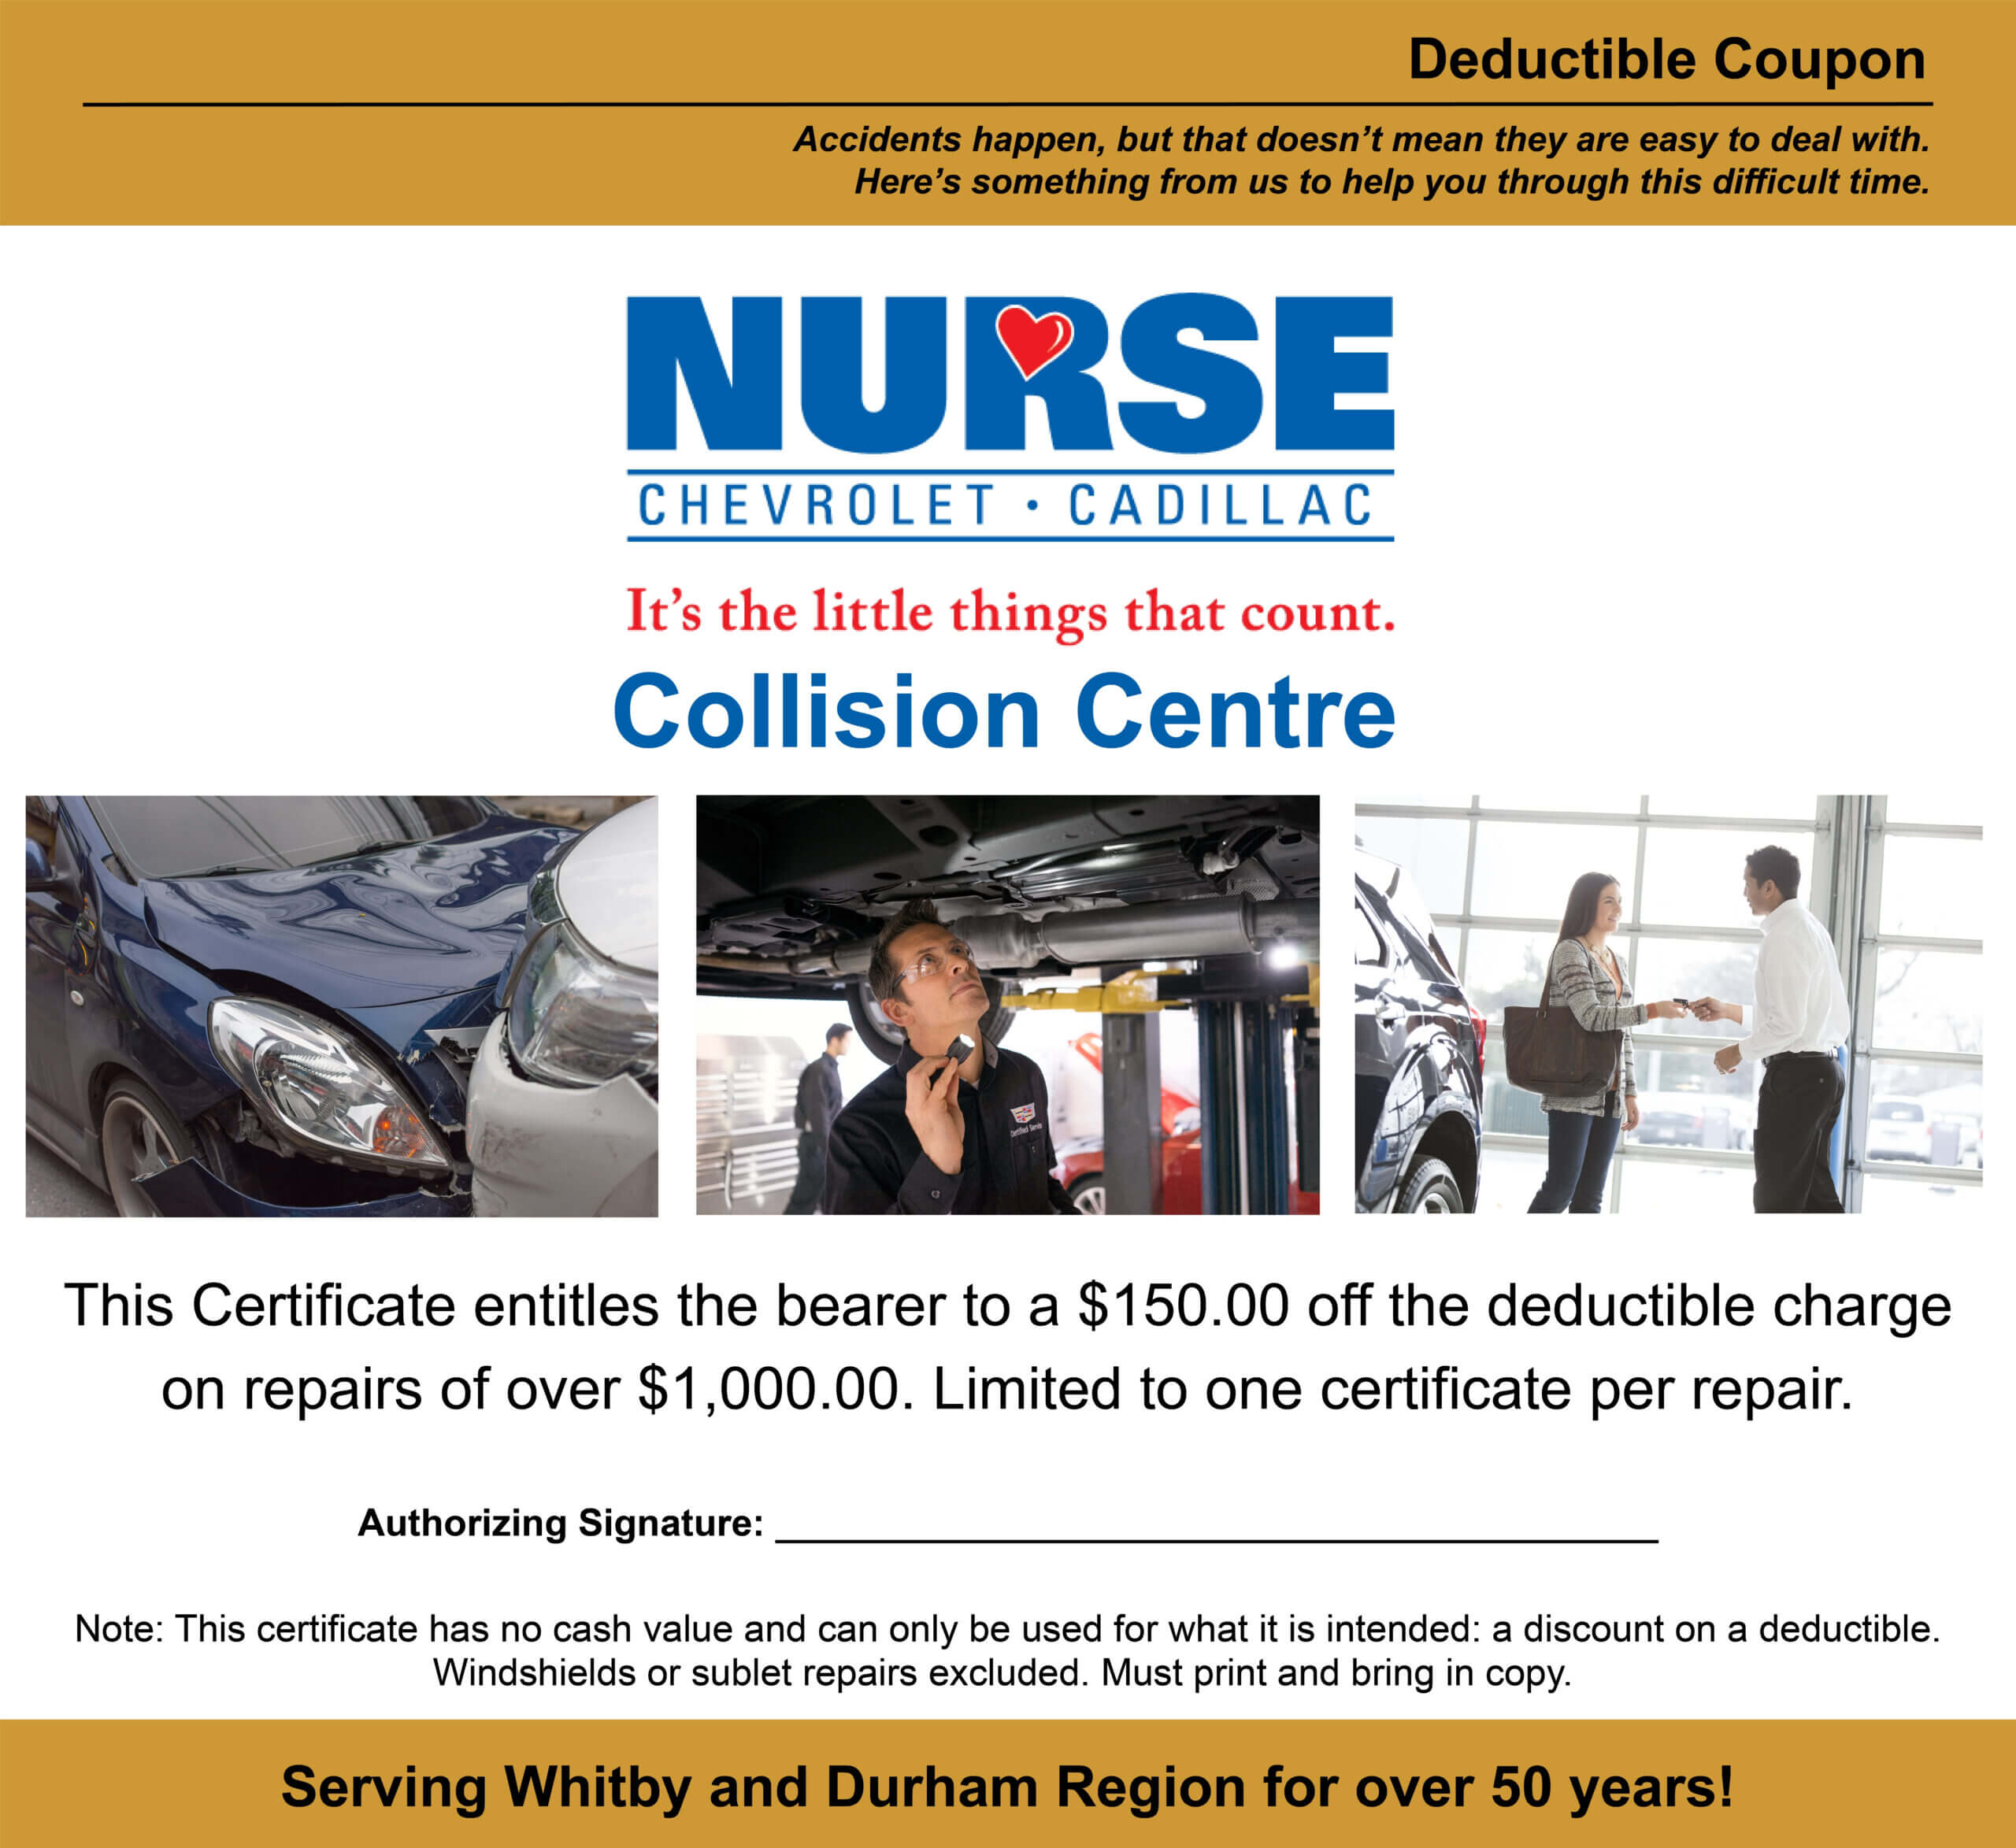 Exclusive Offers | Nurse Chevrolet Cadillac With This Entitles The Bearer To Template Certificate